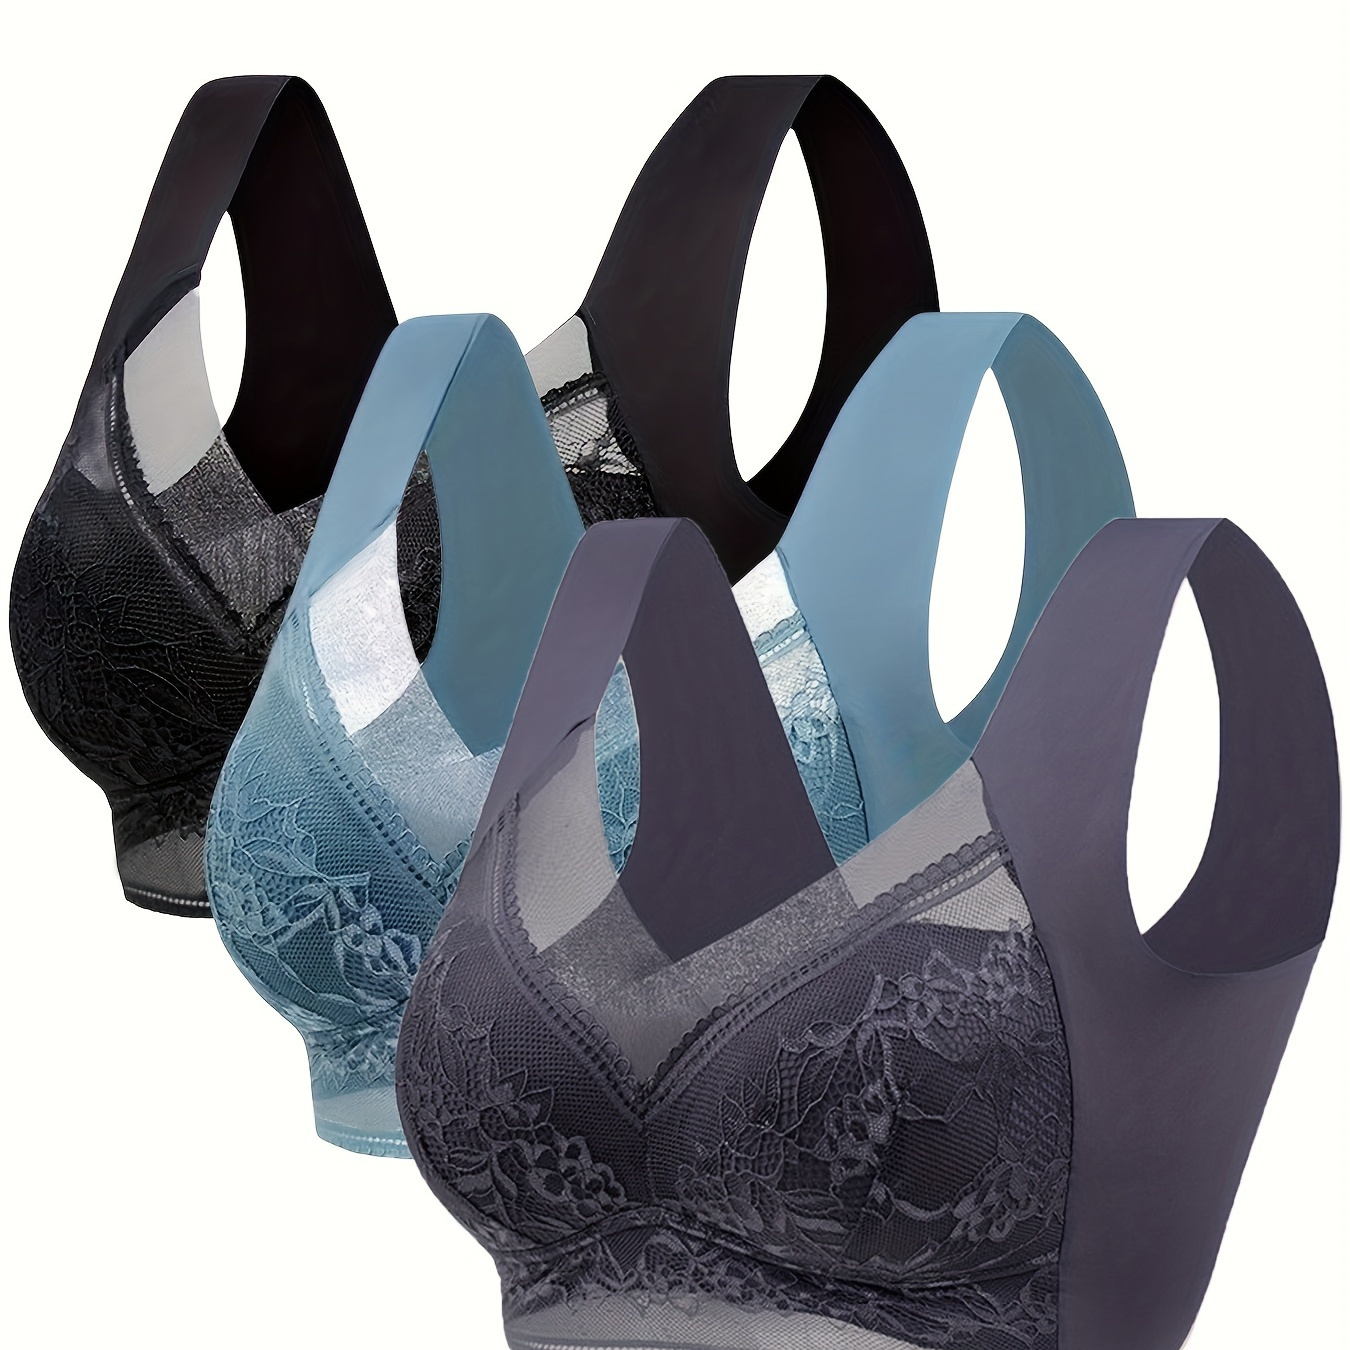 

3-pack Womens Floral Lace Sports Bras Set - Full Coverage, Ultra-comfortable, Ventilated Push Up Bralettes For Active Wear